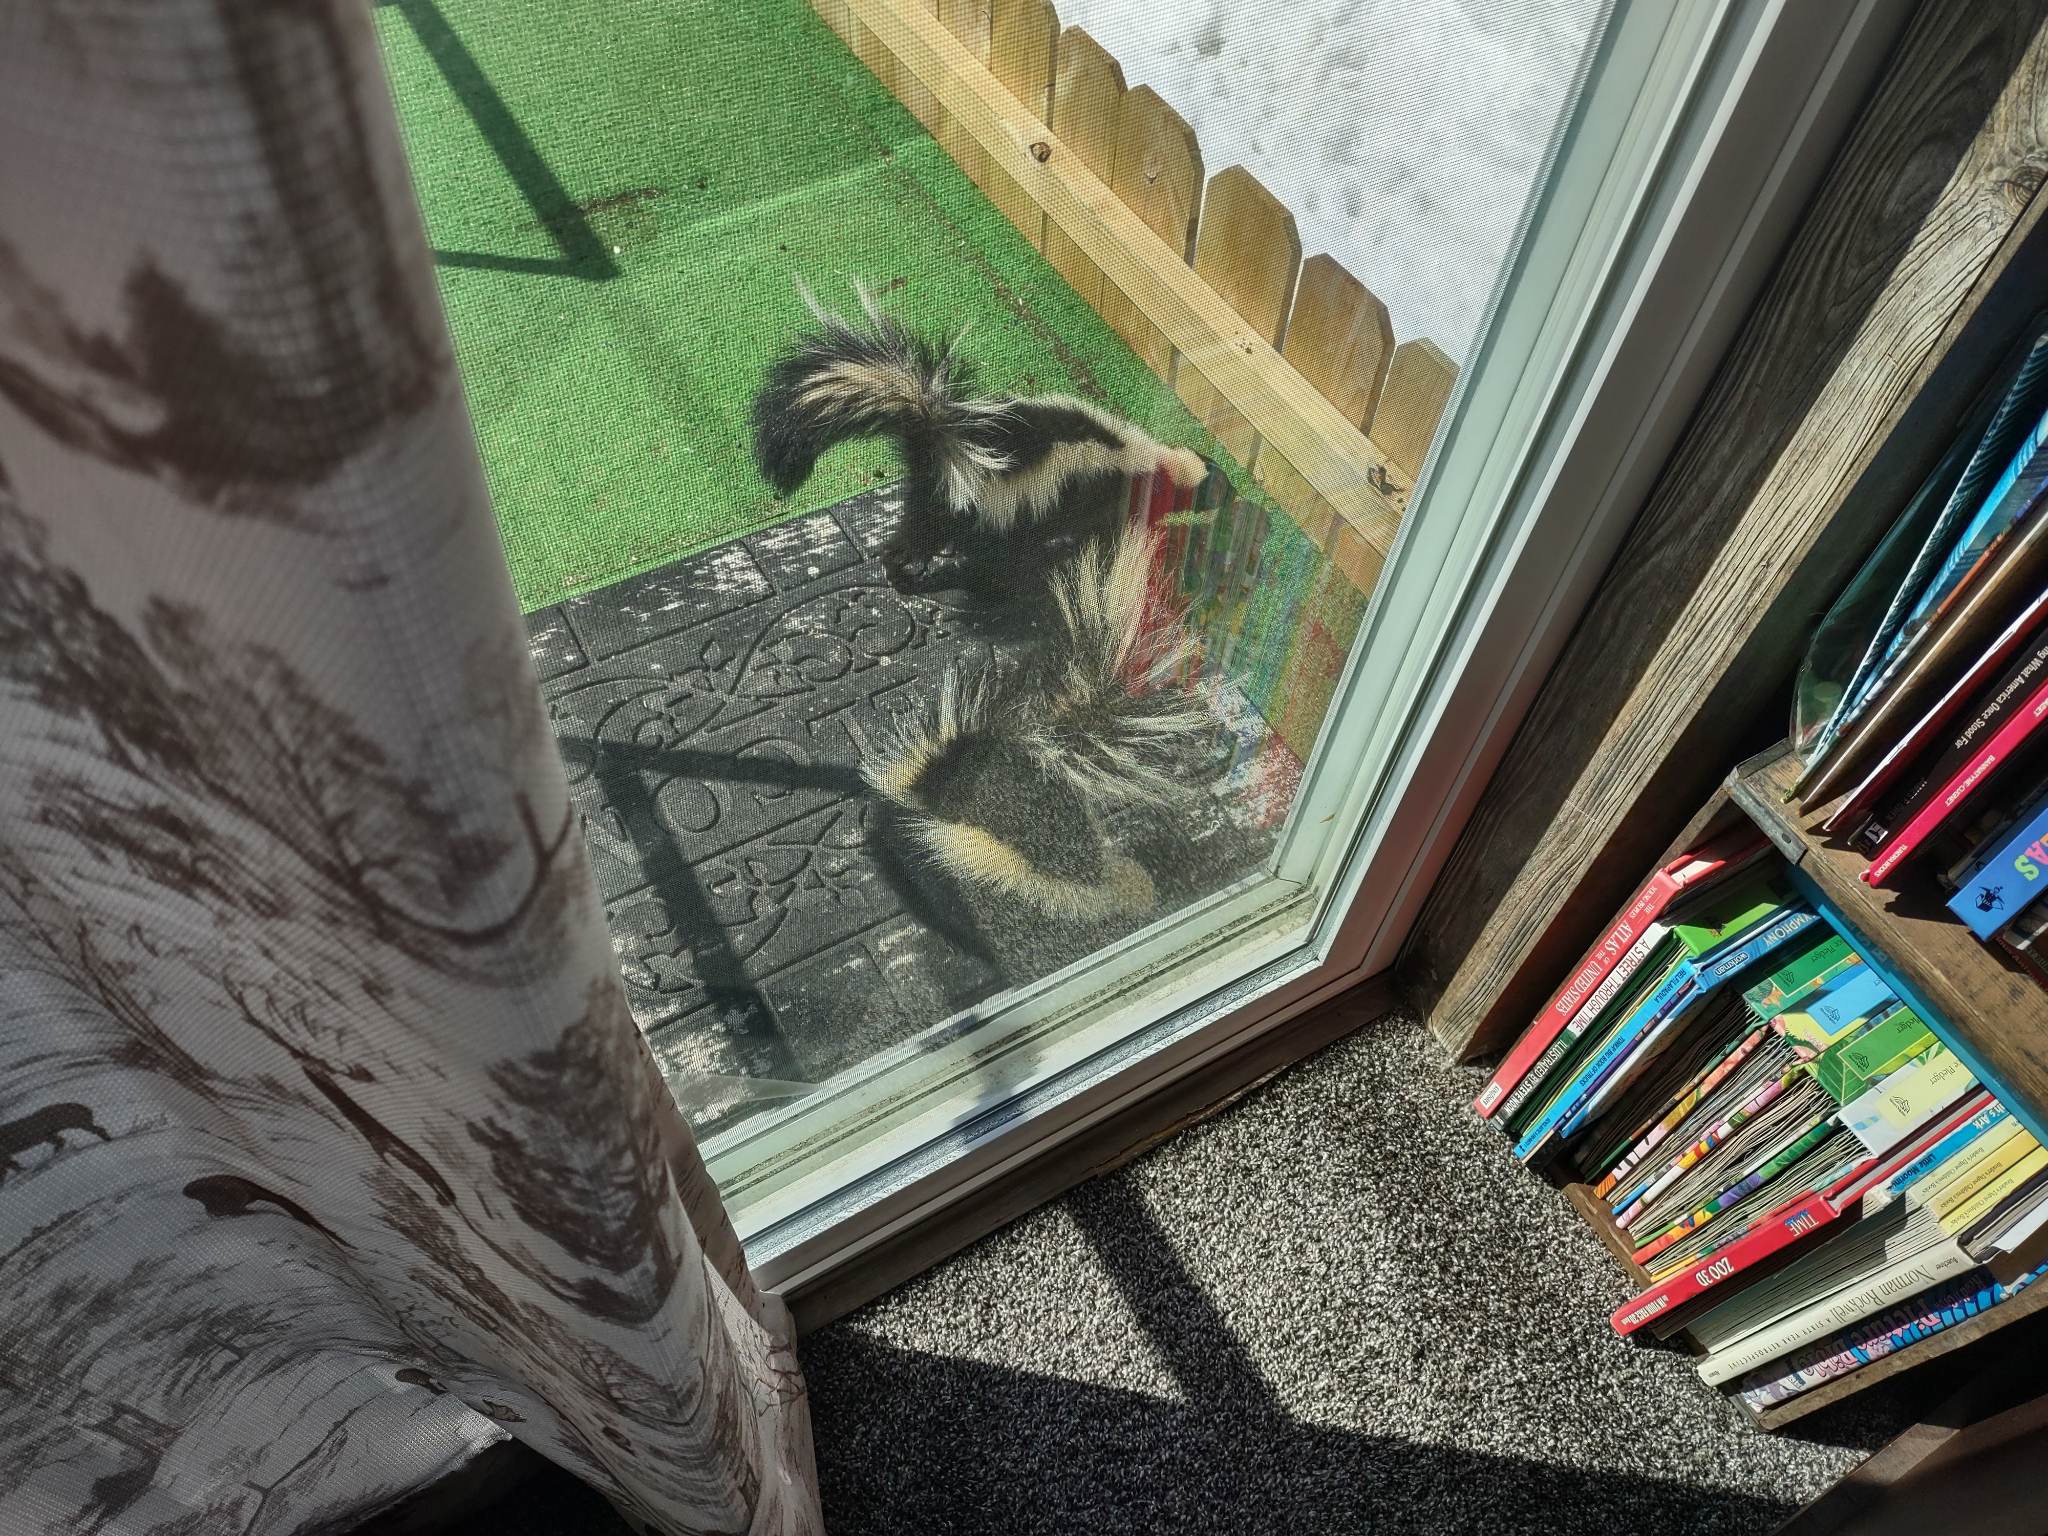 Two skunks gather at a sliding glass door.